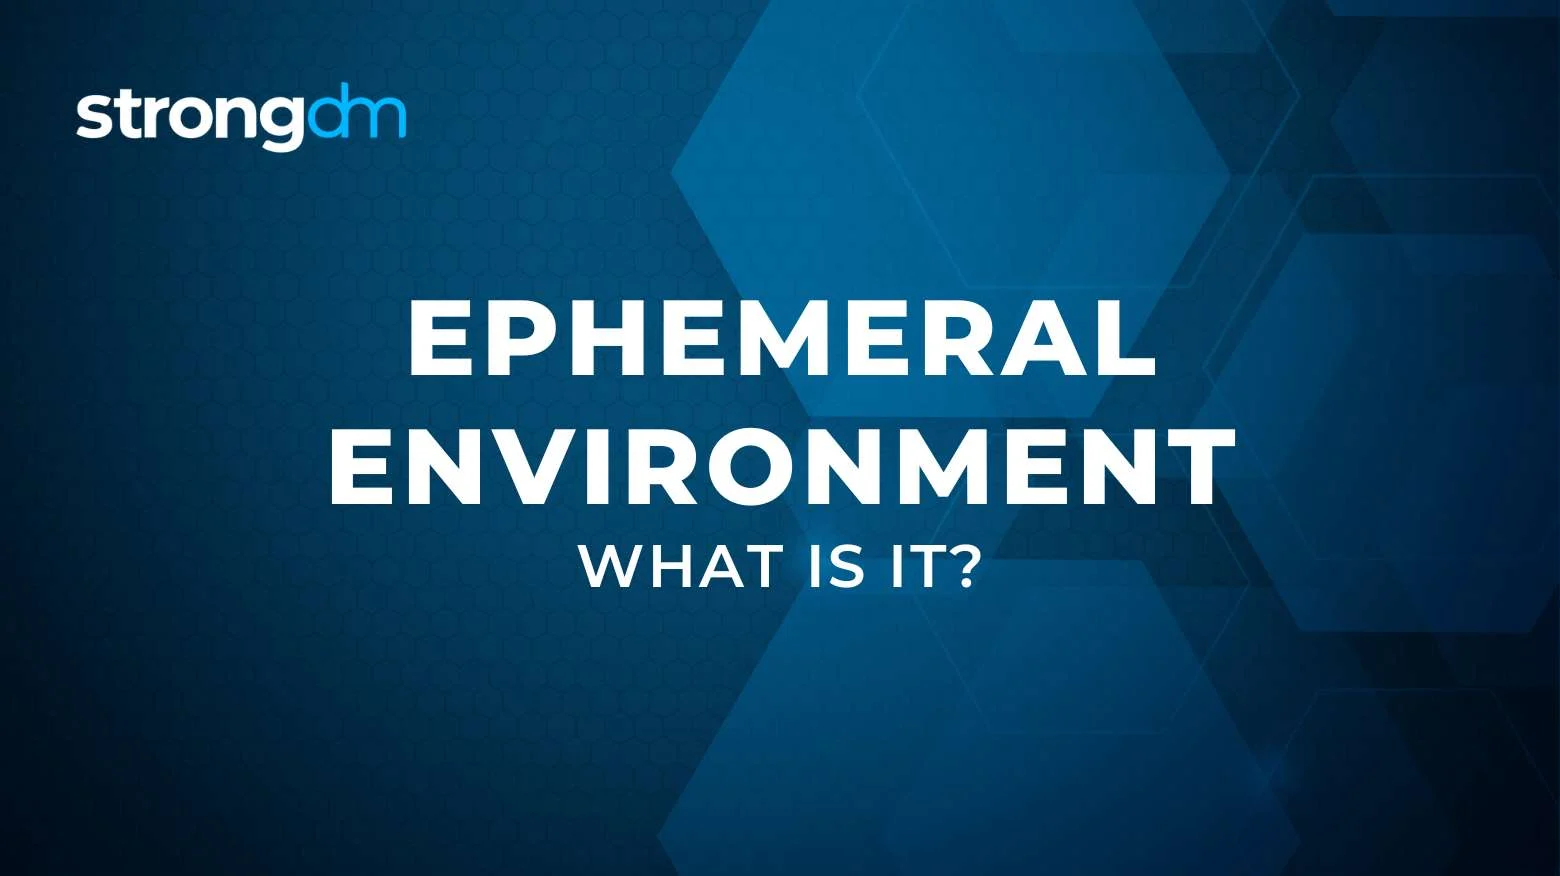 What Is an Ephemeral Environment?